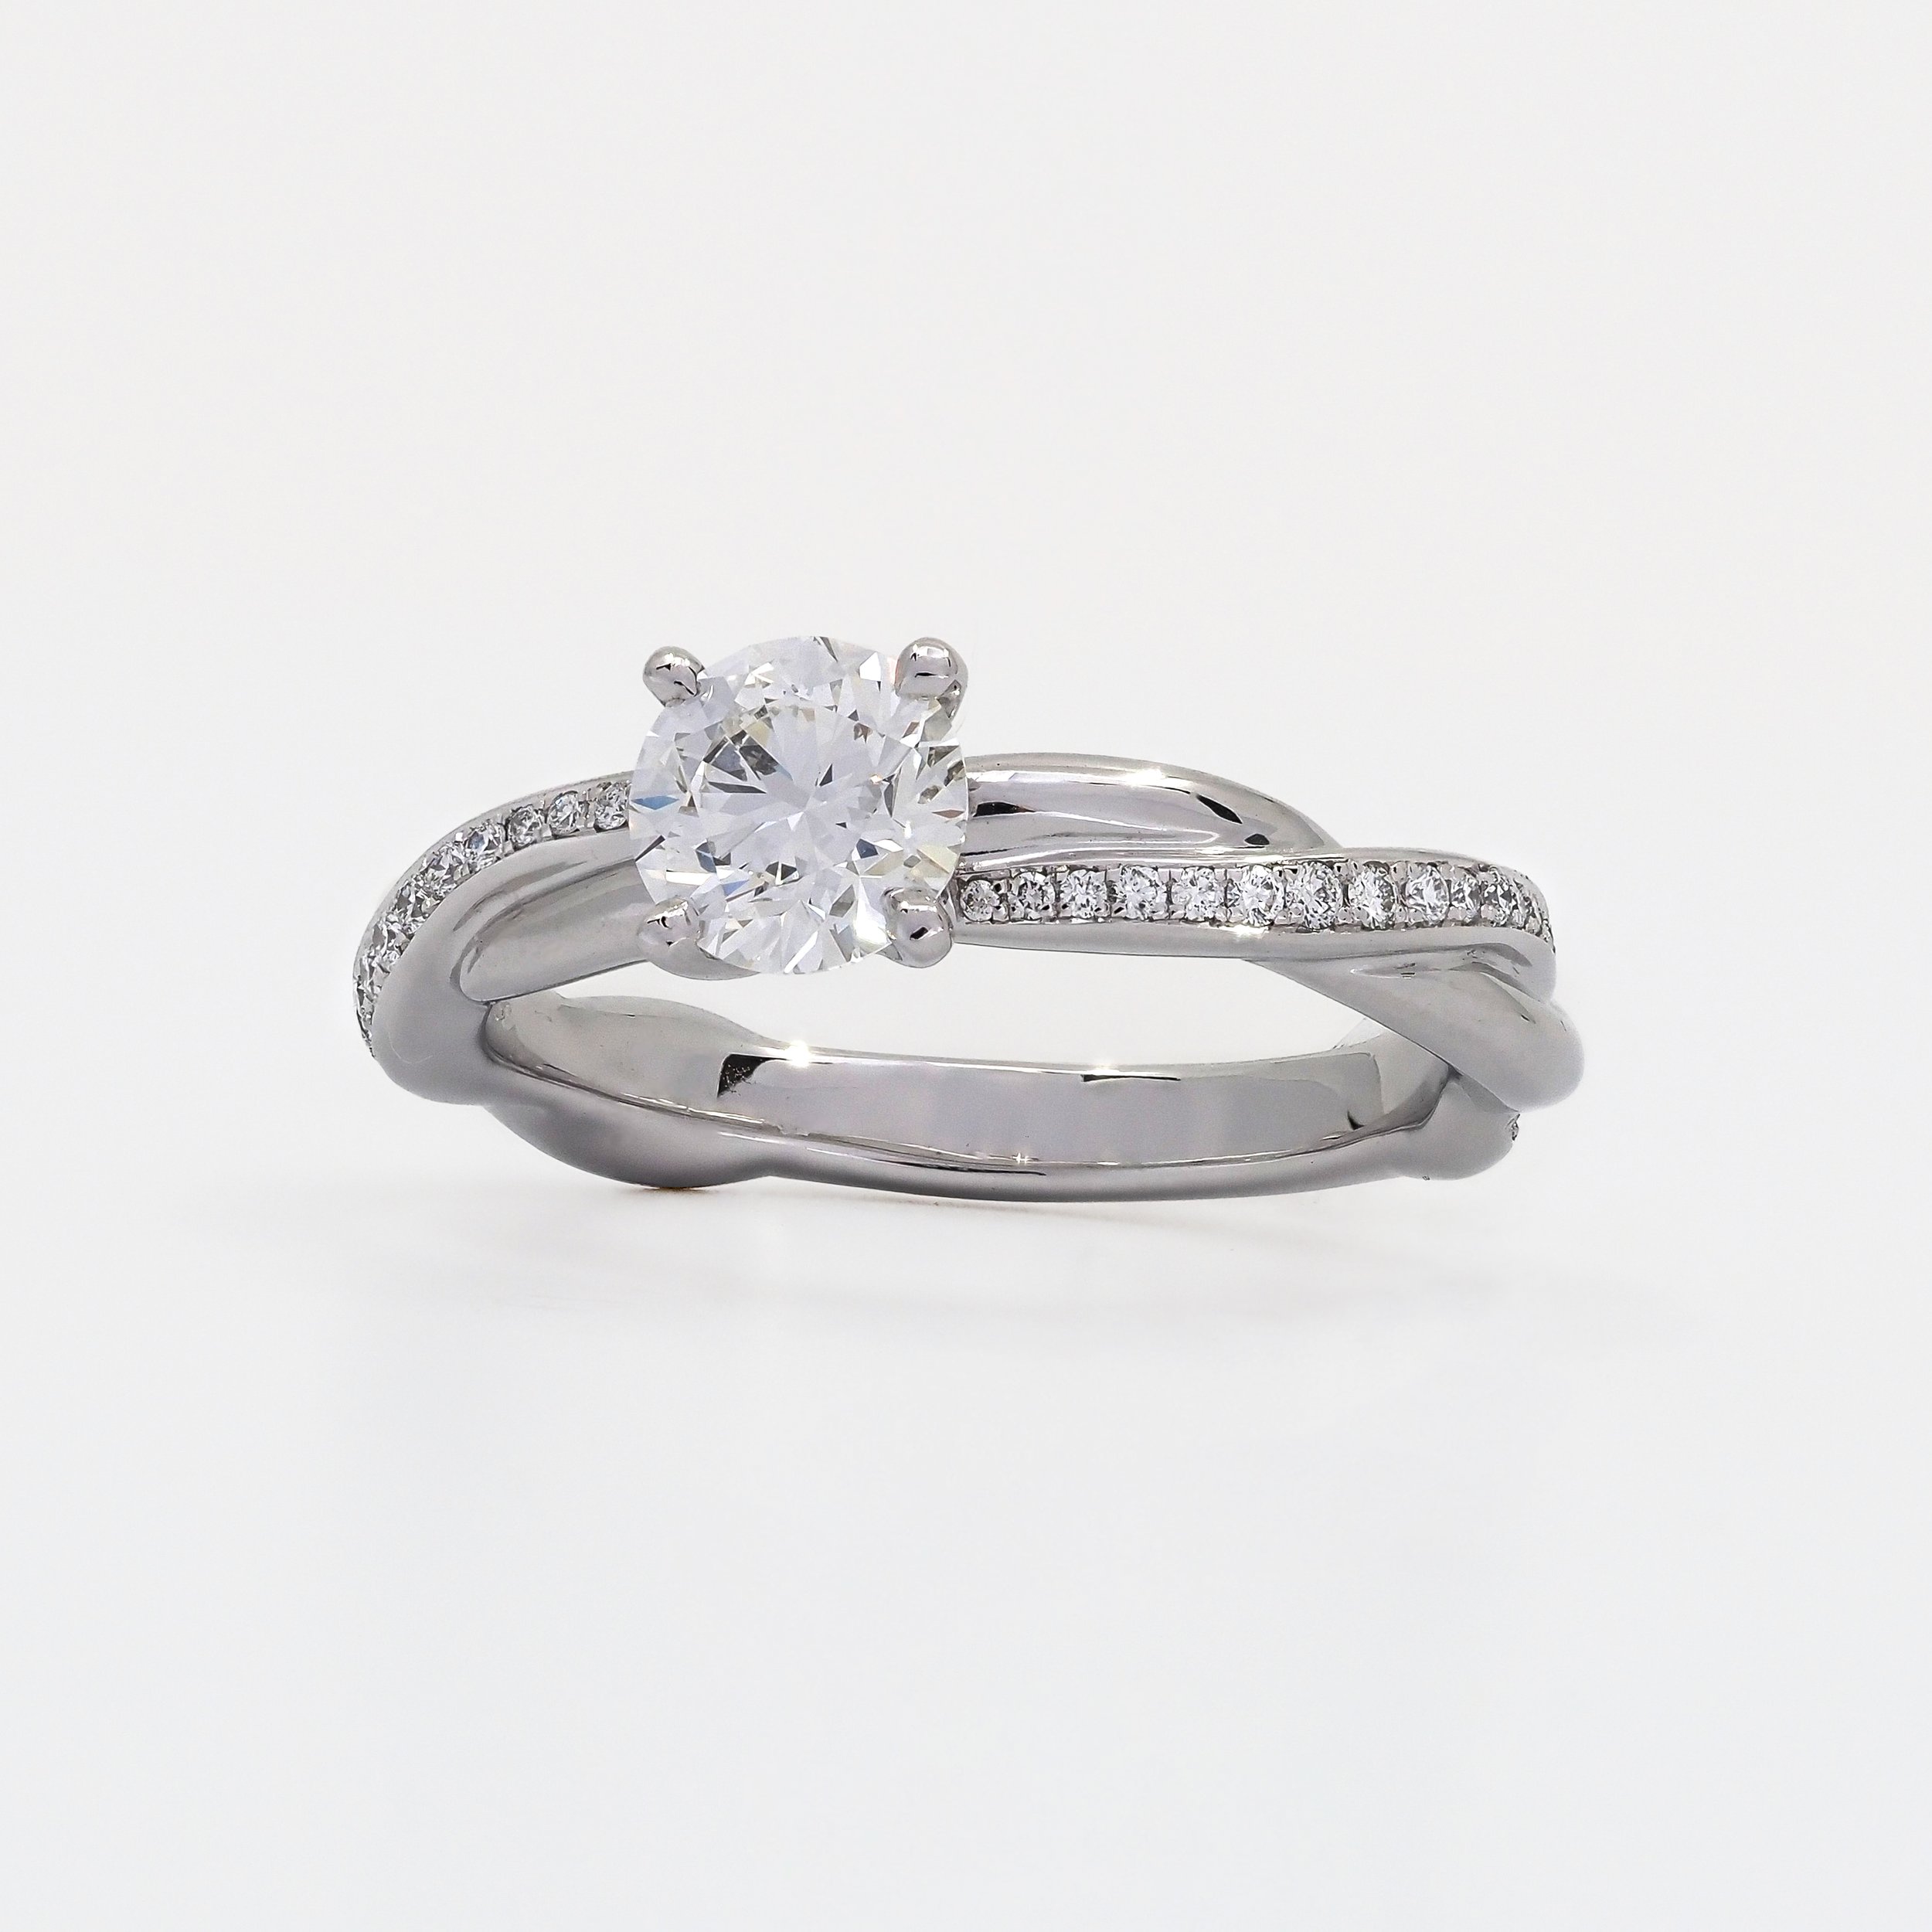 Solitaire ring "Twist"